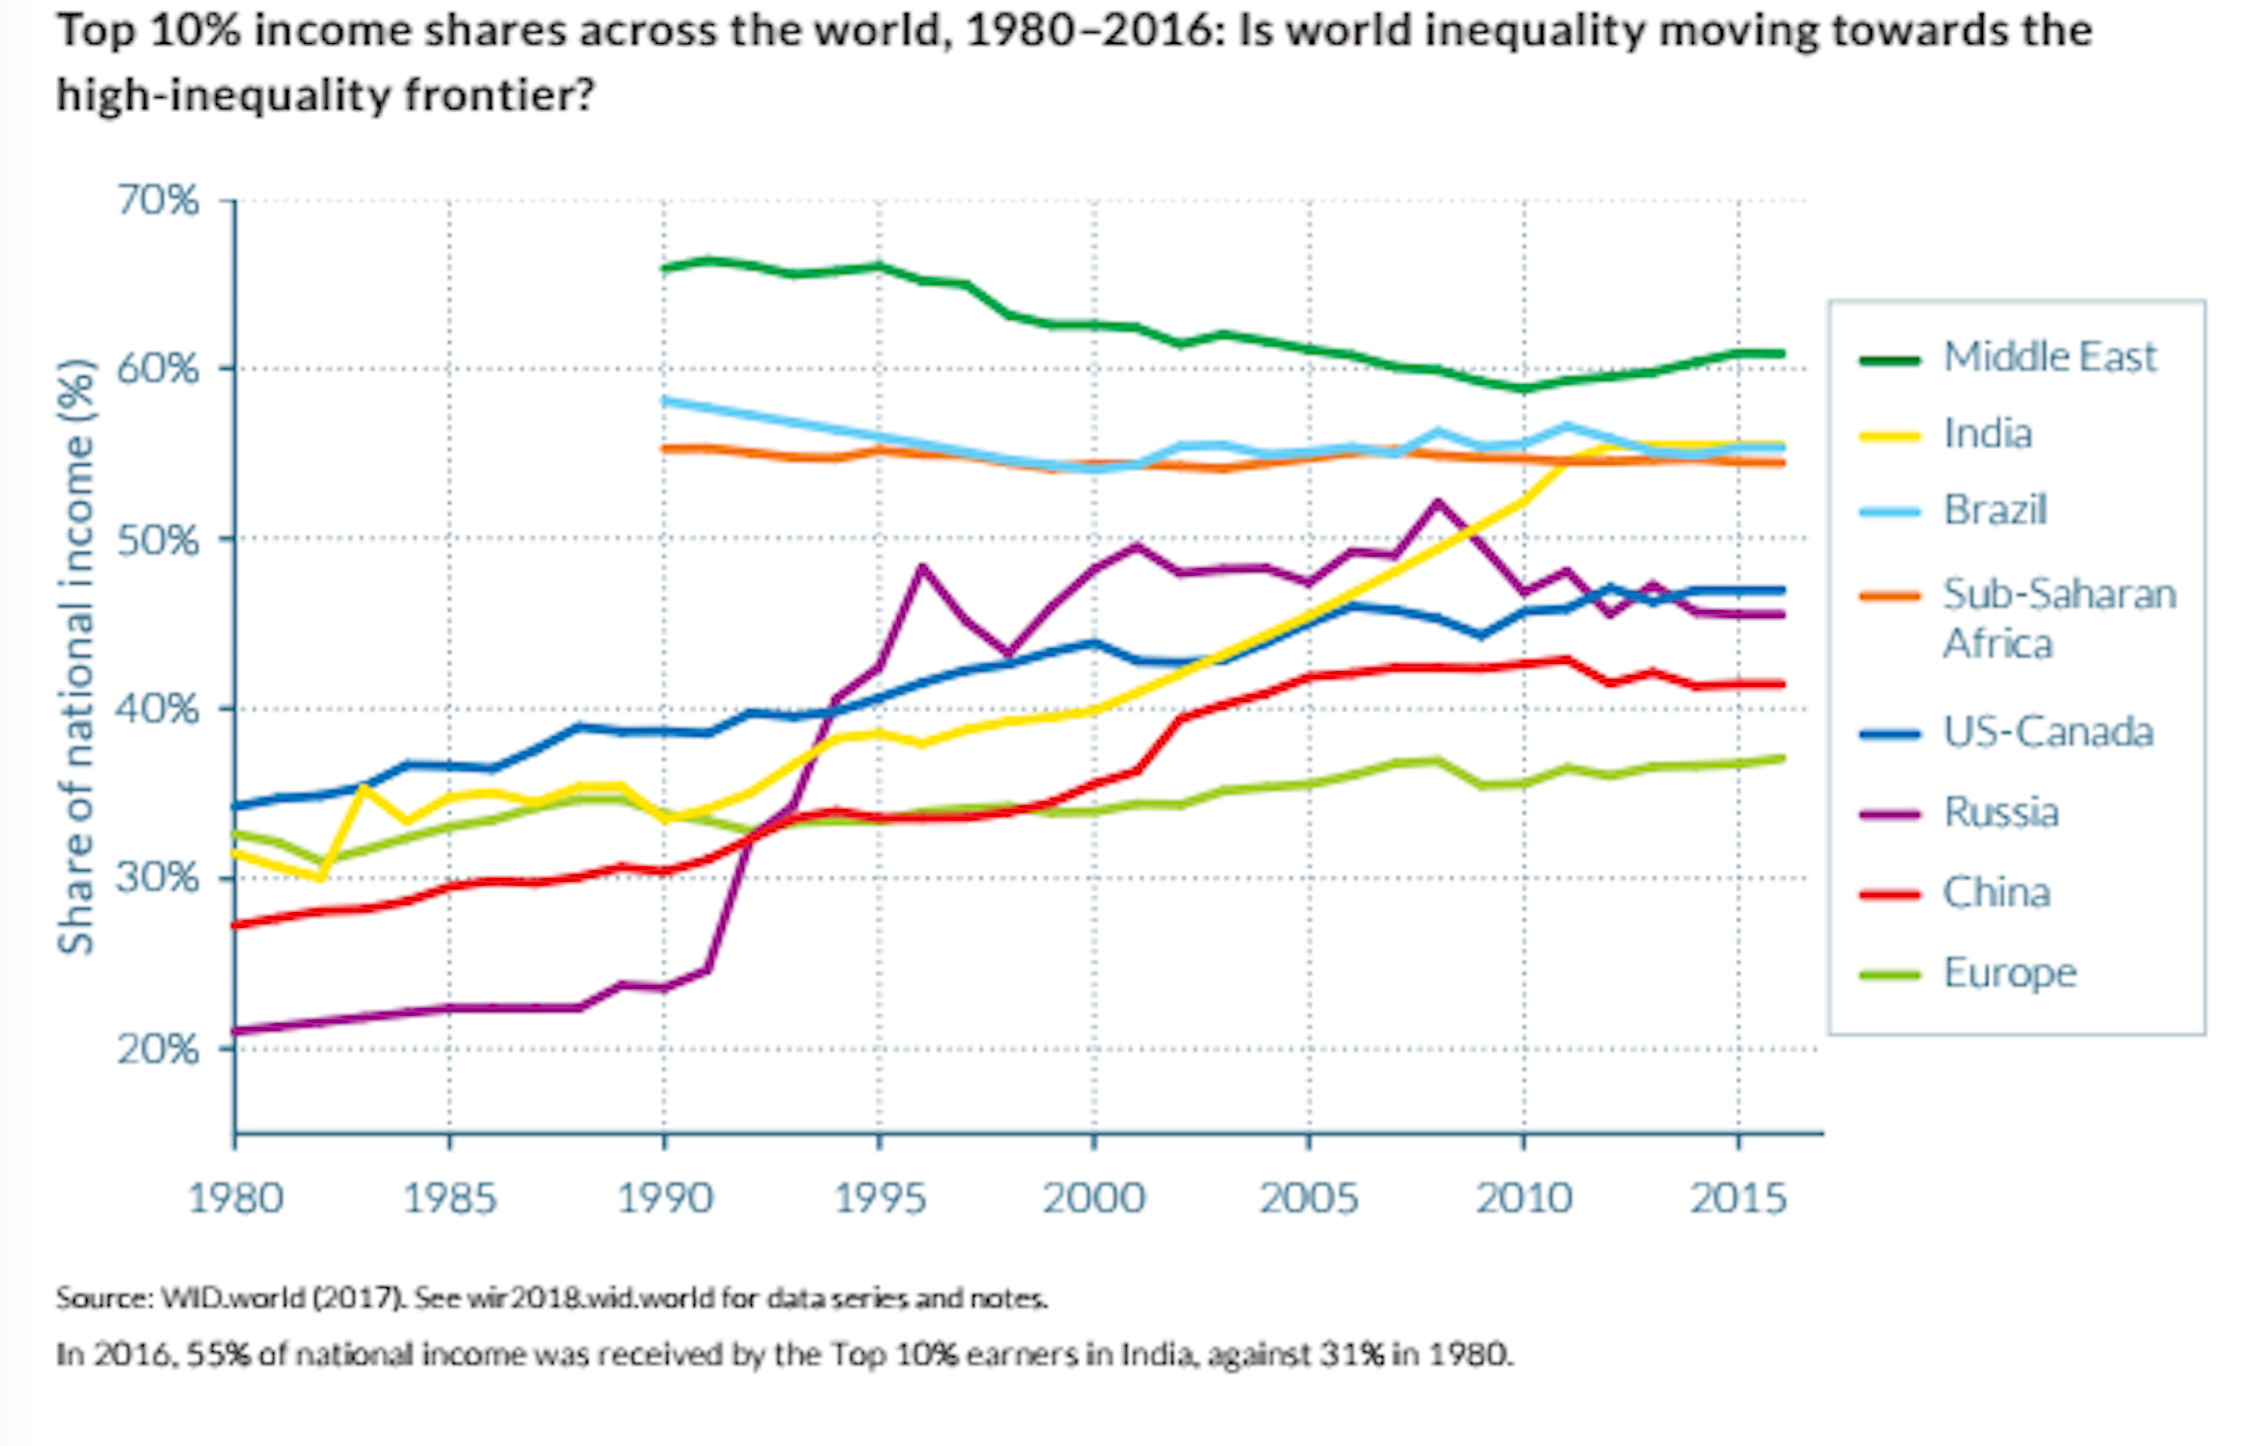 Global inequality is on the rise but at vastly different rates across